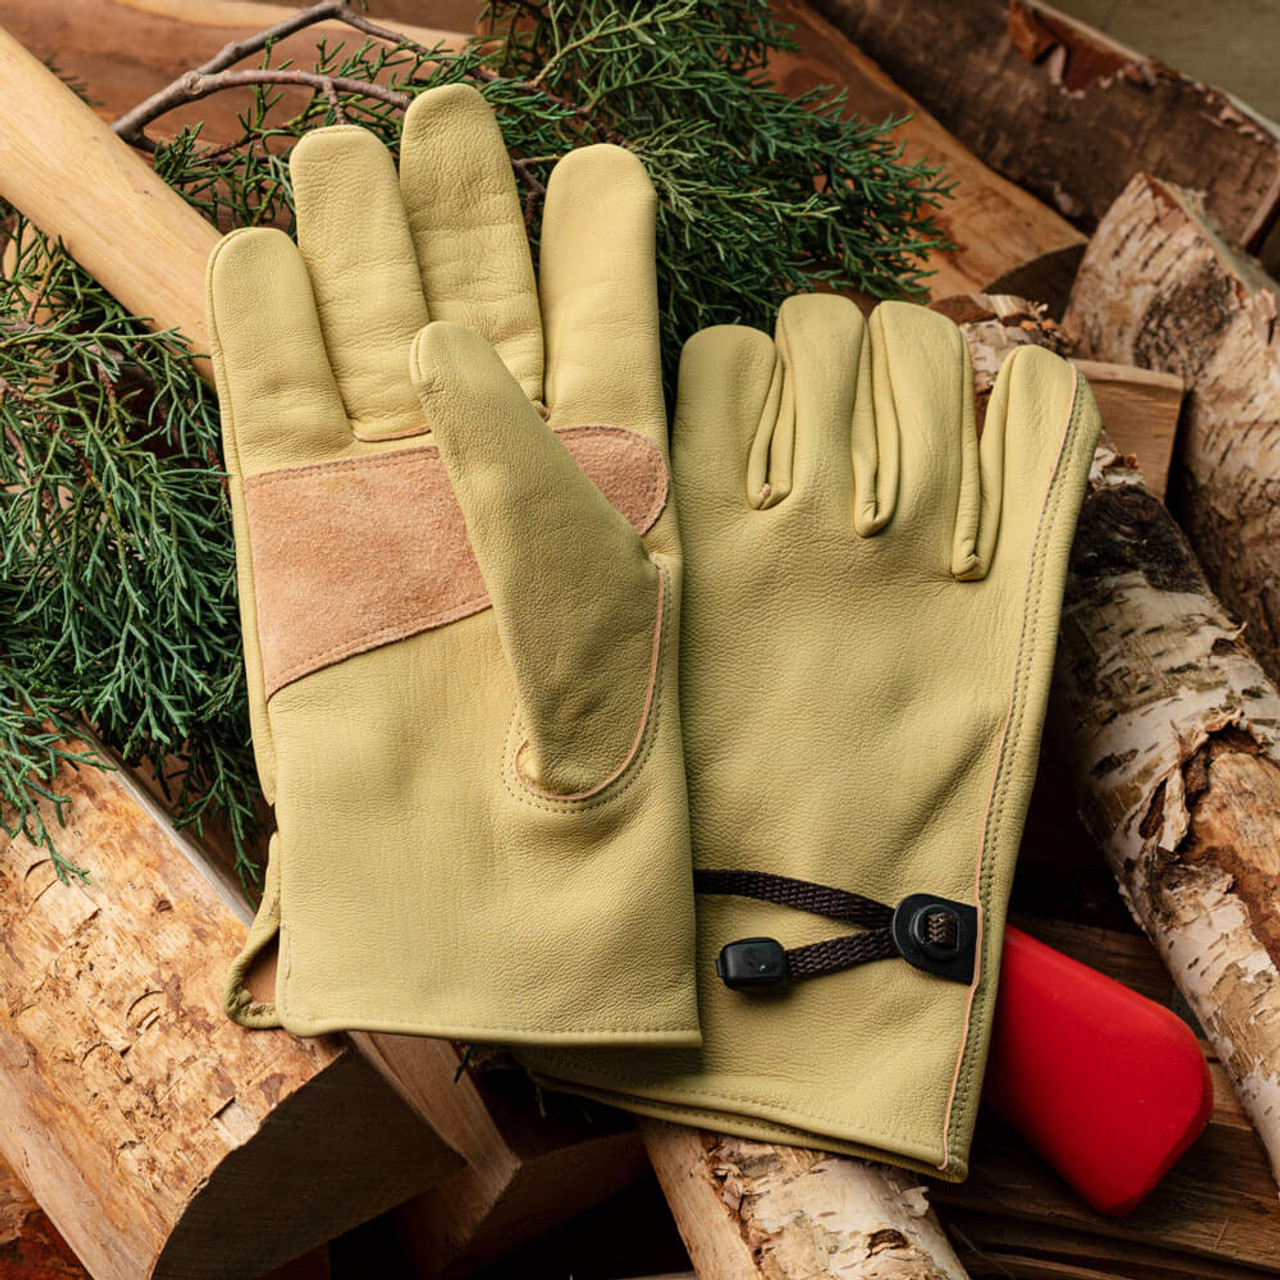 How To Choose the Best Leather Work Gloves for the Job